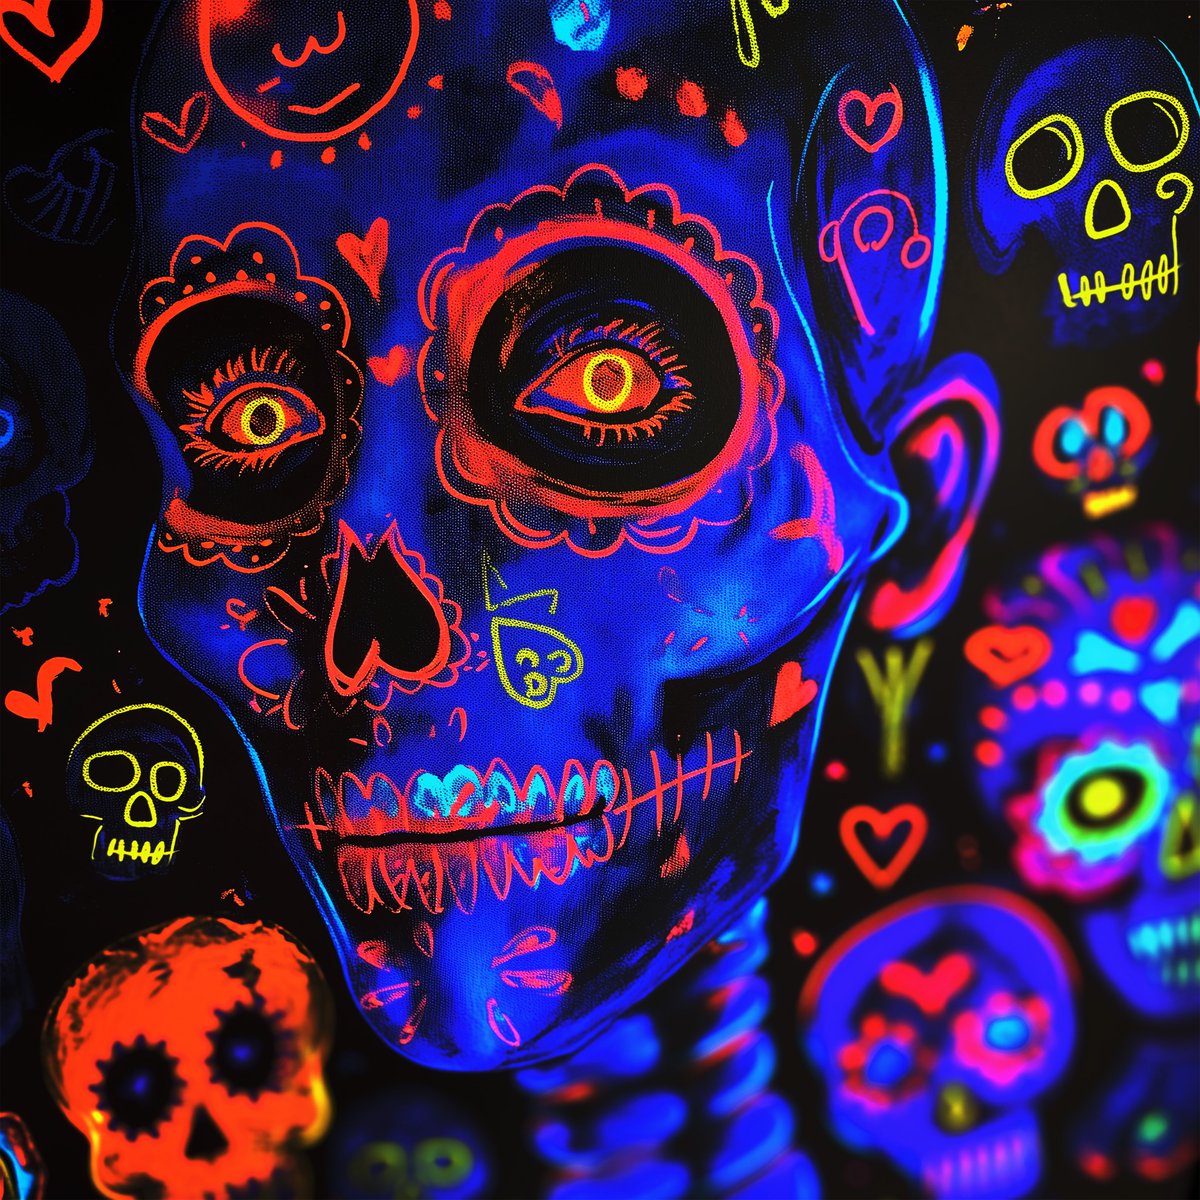 🚨 NEW DROP and Holder Airdrop

1⃣ NEON PEOPLE holders
2⃣ Ampelmännchen (Pedestrian Signal) holders
...have been gifted! 
Thank you so much for being with me up to here. 🙏🫂❤️ I hug you all! 

'La Santísima Muerte' from my Mostly AI Collection
For sale on @objktcom!